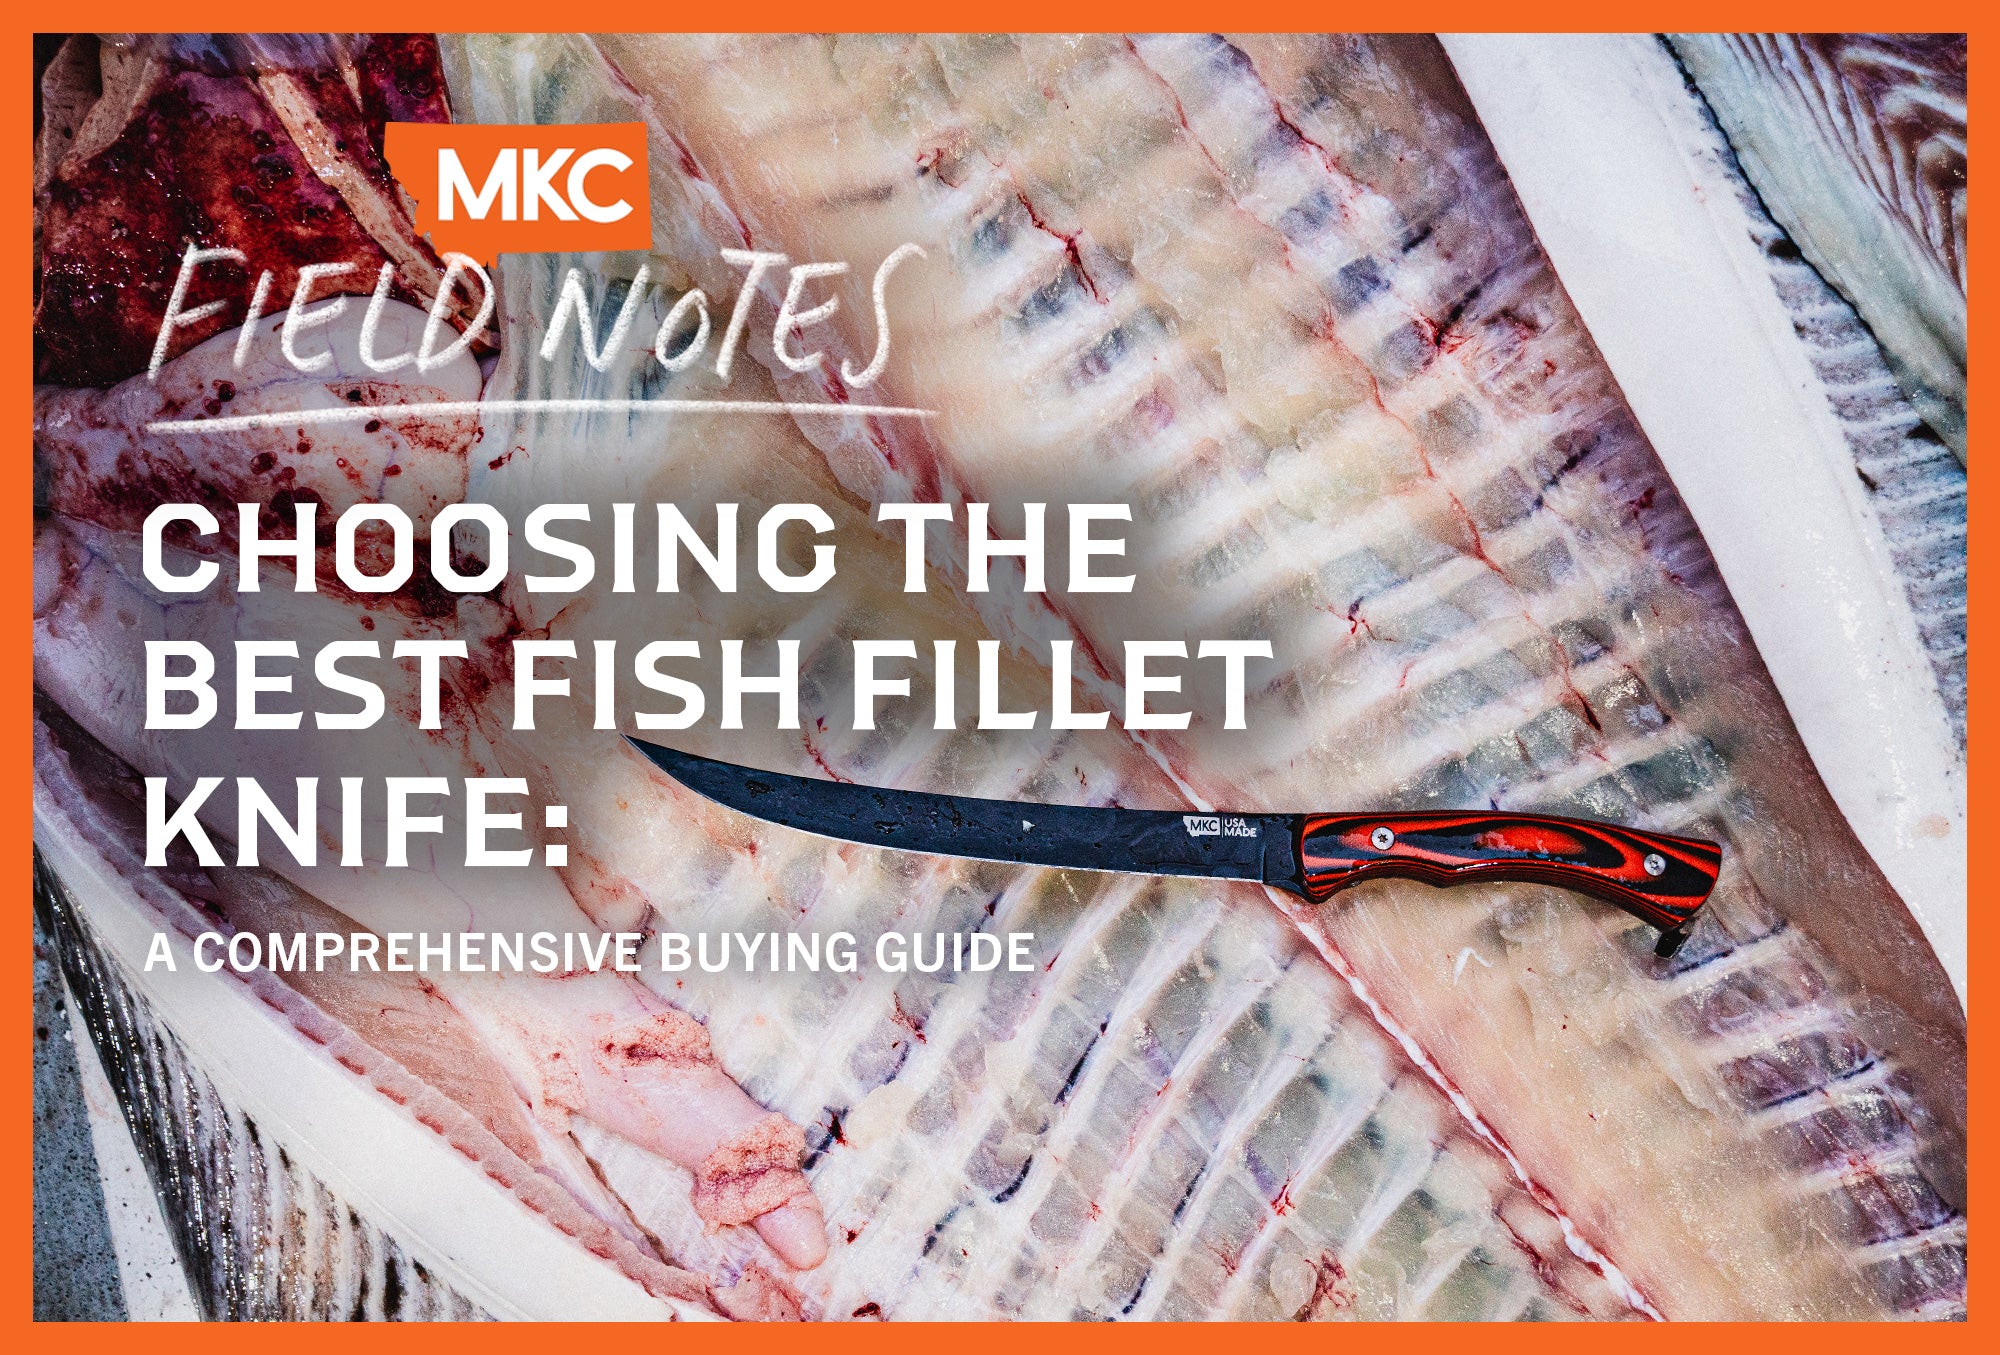 A large white fish lies filleted open with the best fish fillet knife from MKC resting on the ribs.